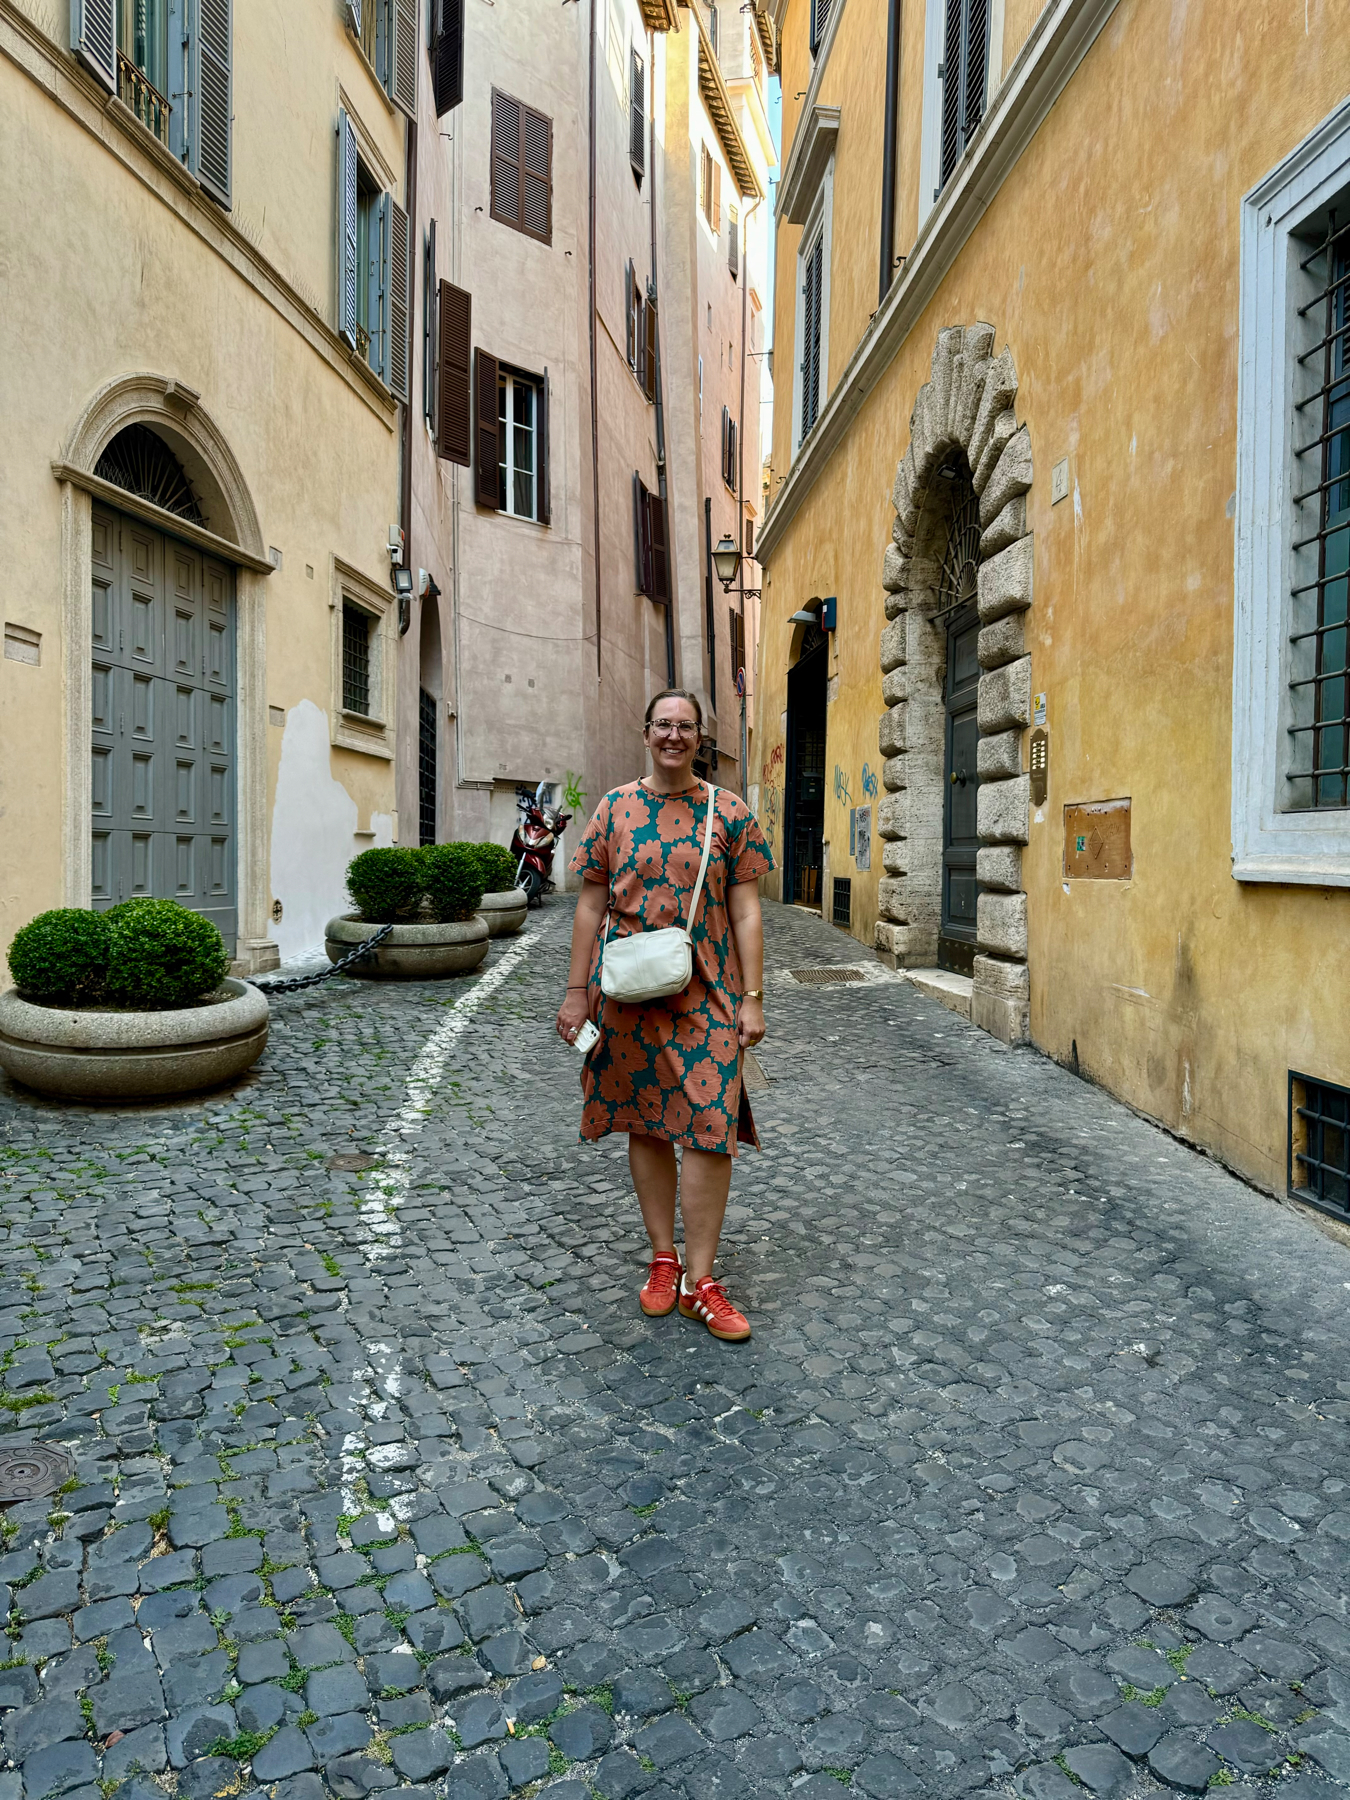 A person standing on a cobblestone street in Rome, surrounded by narrow buildings with wooden shutters and ornate doorways. The individual is wearing a patterned dress and red shoes, and is holding a phone, with a crossbody bag.